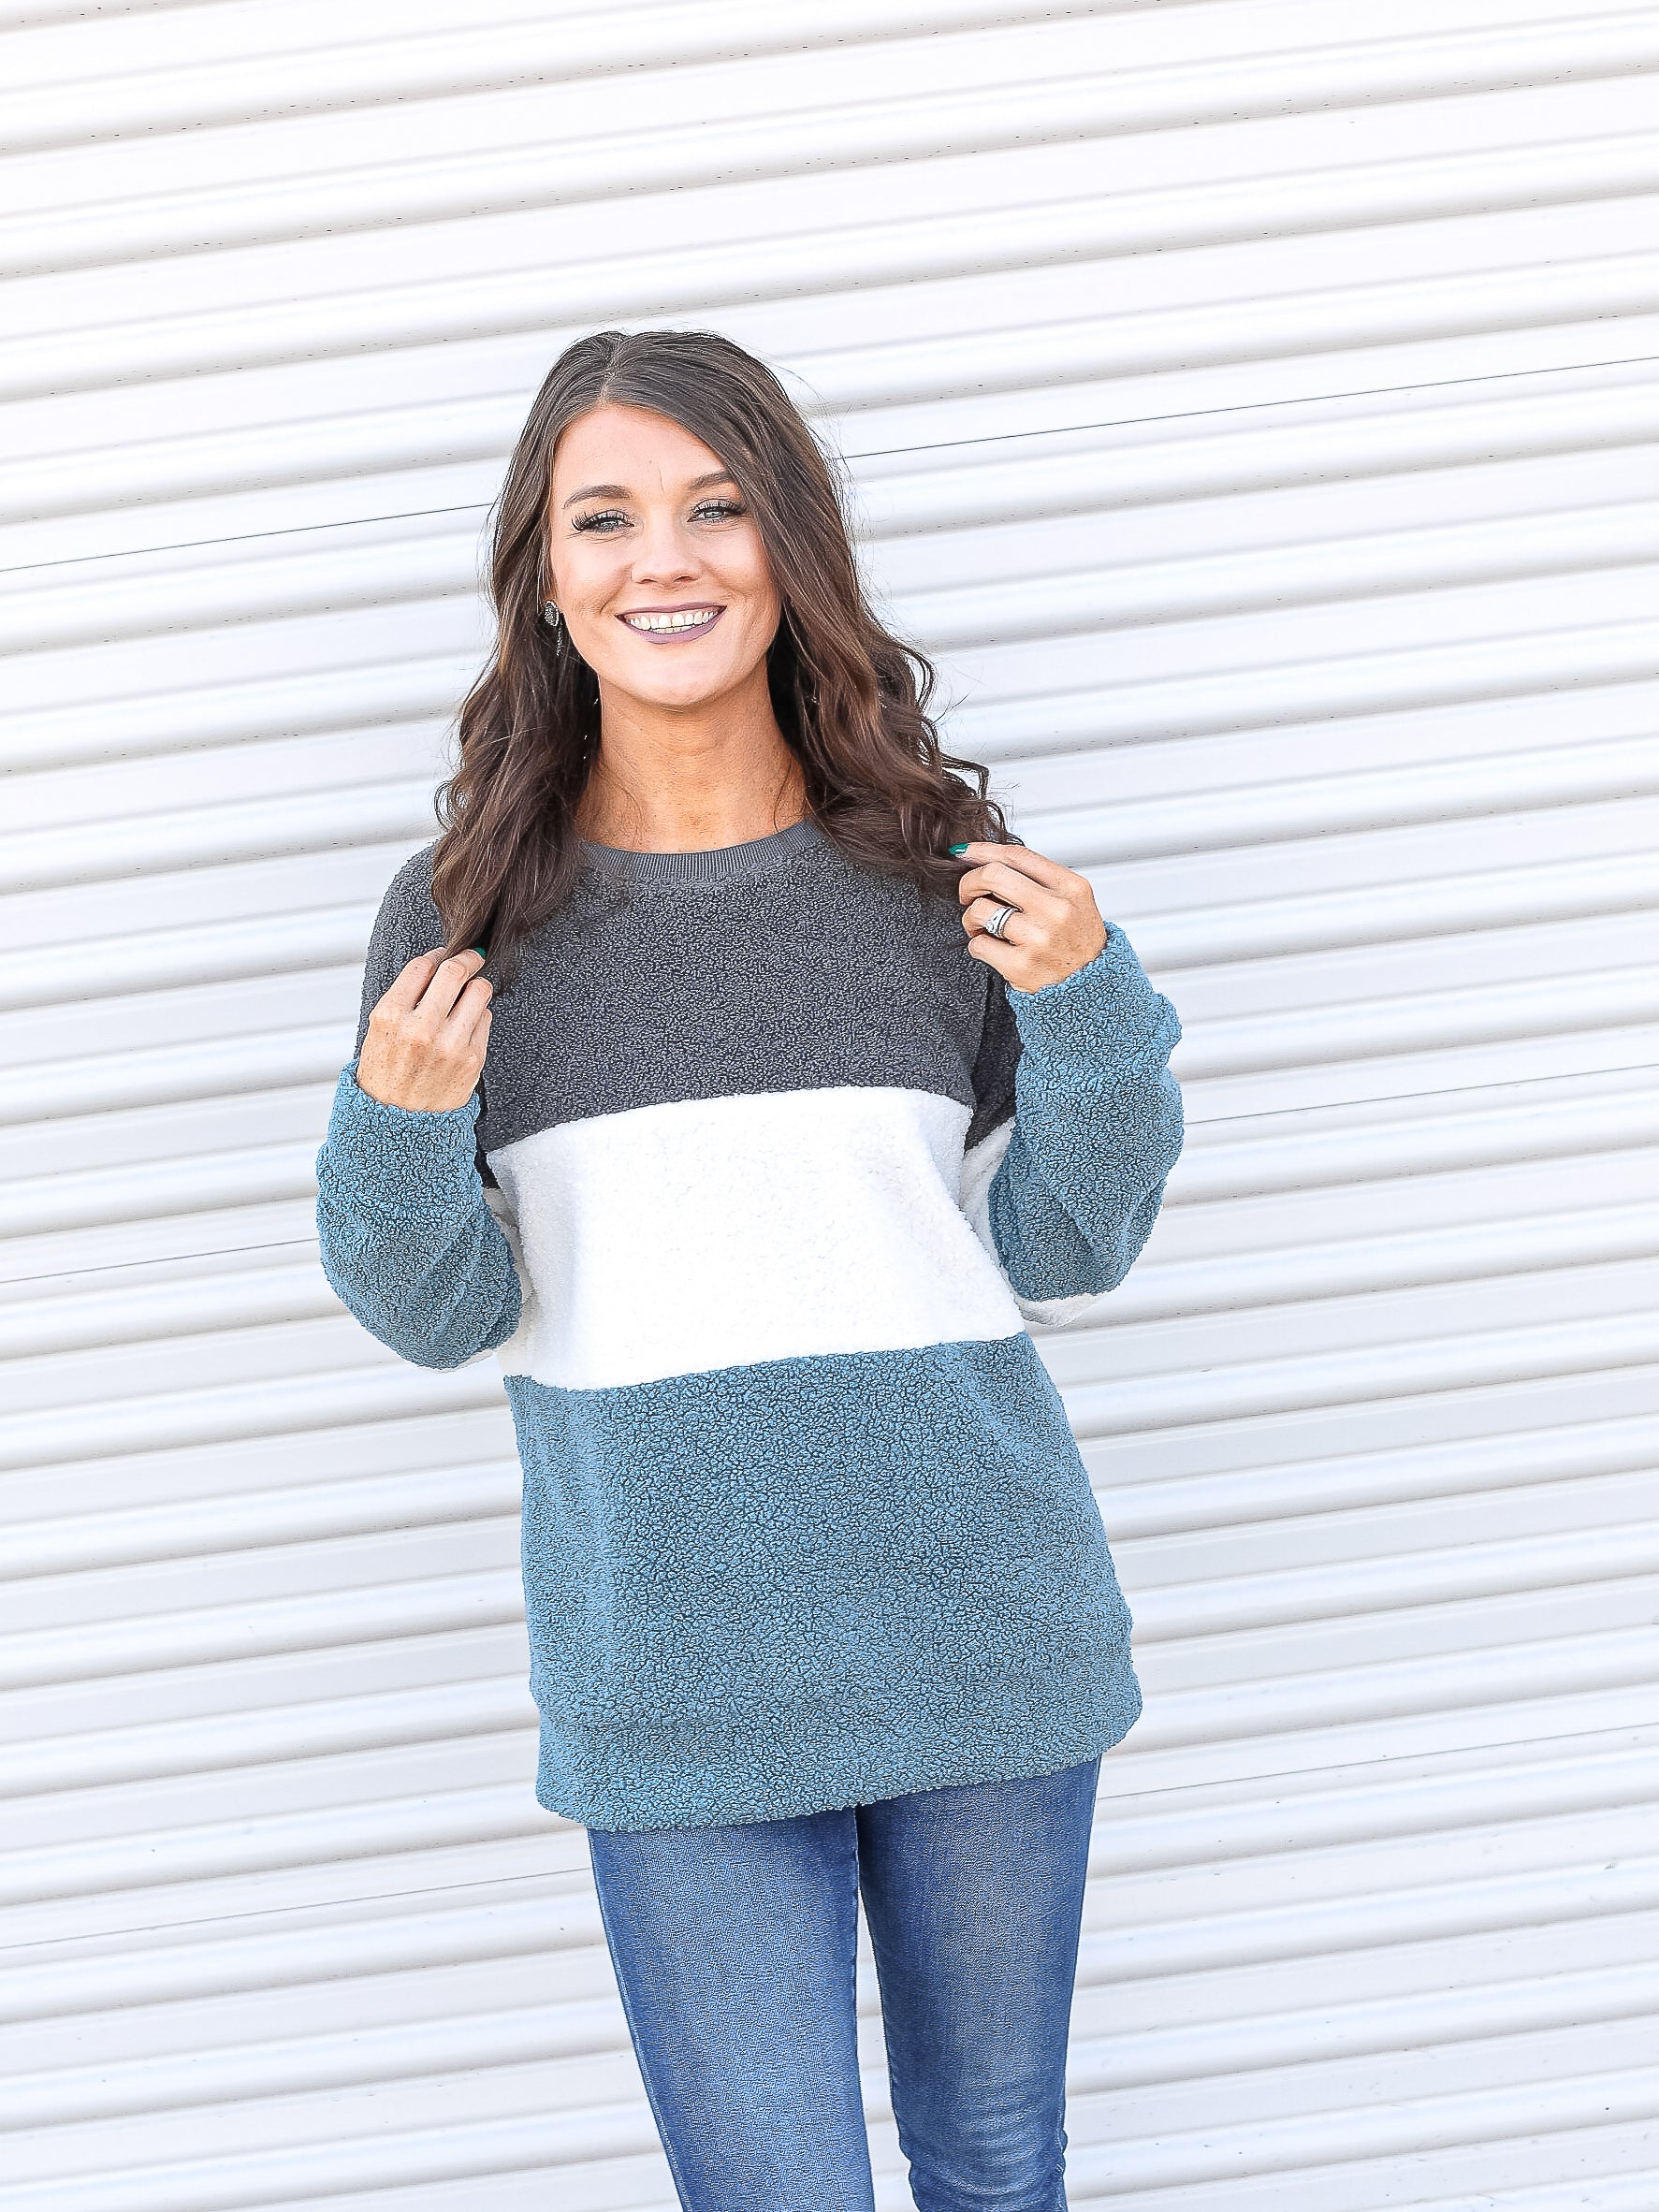 Plush sweater with grey, white, and blue color blocking down the top.